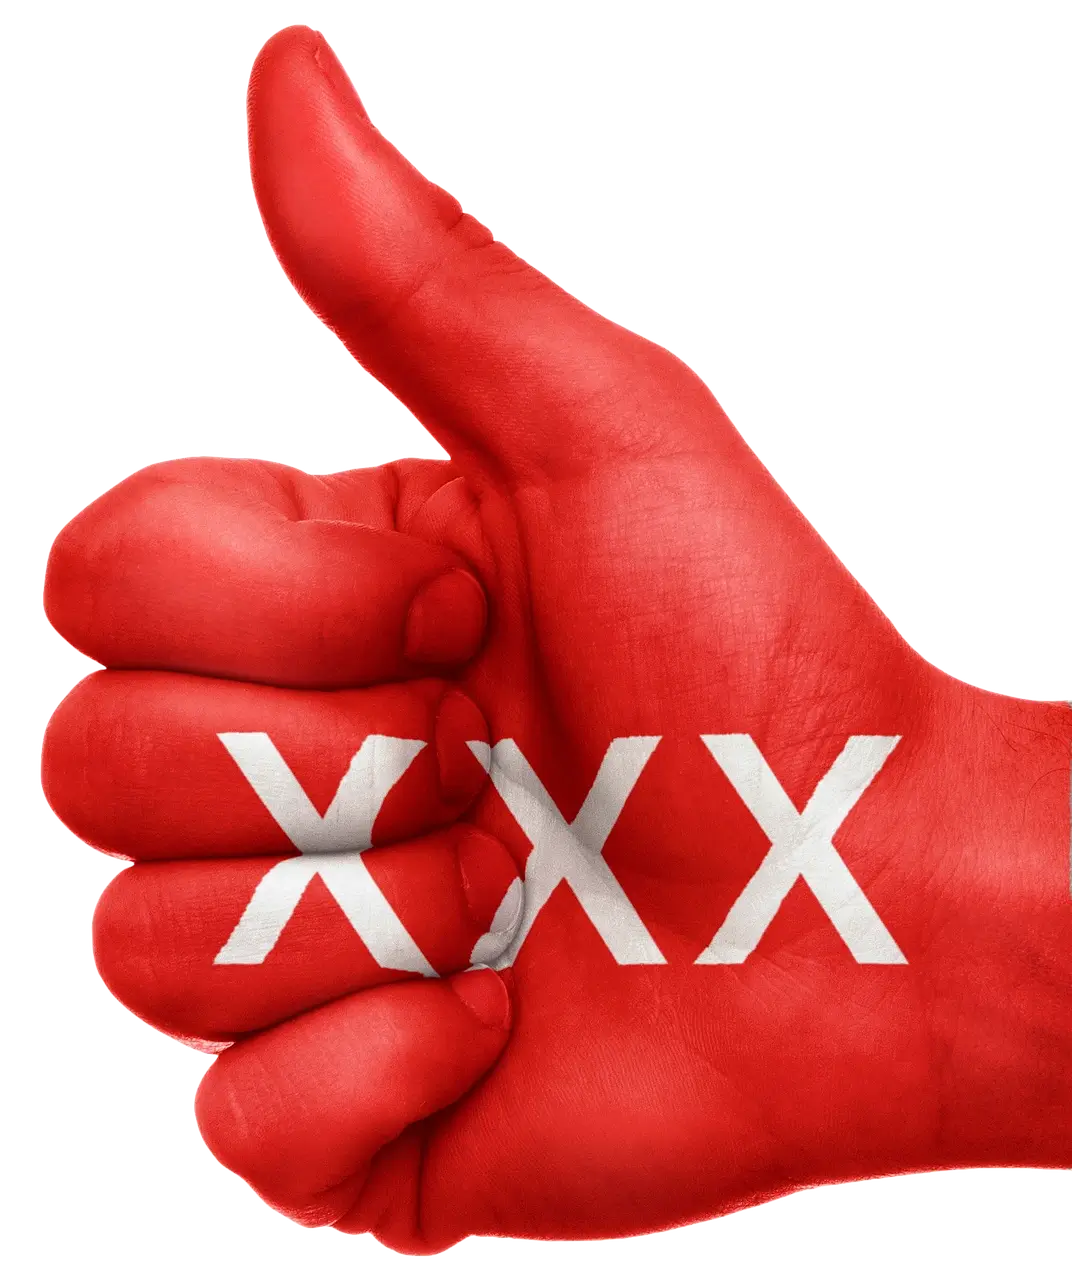 thumbs up for XXX